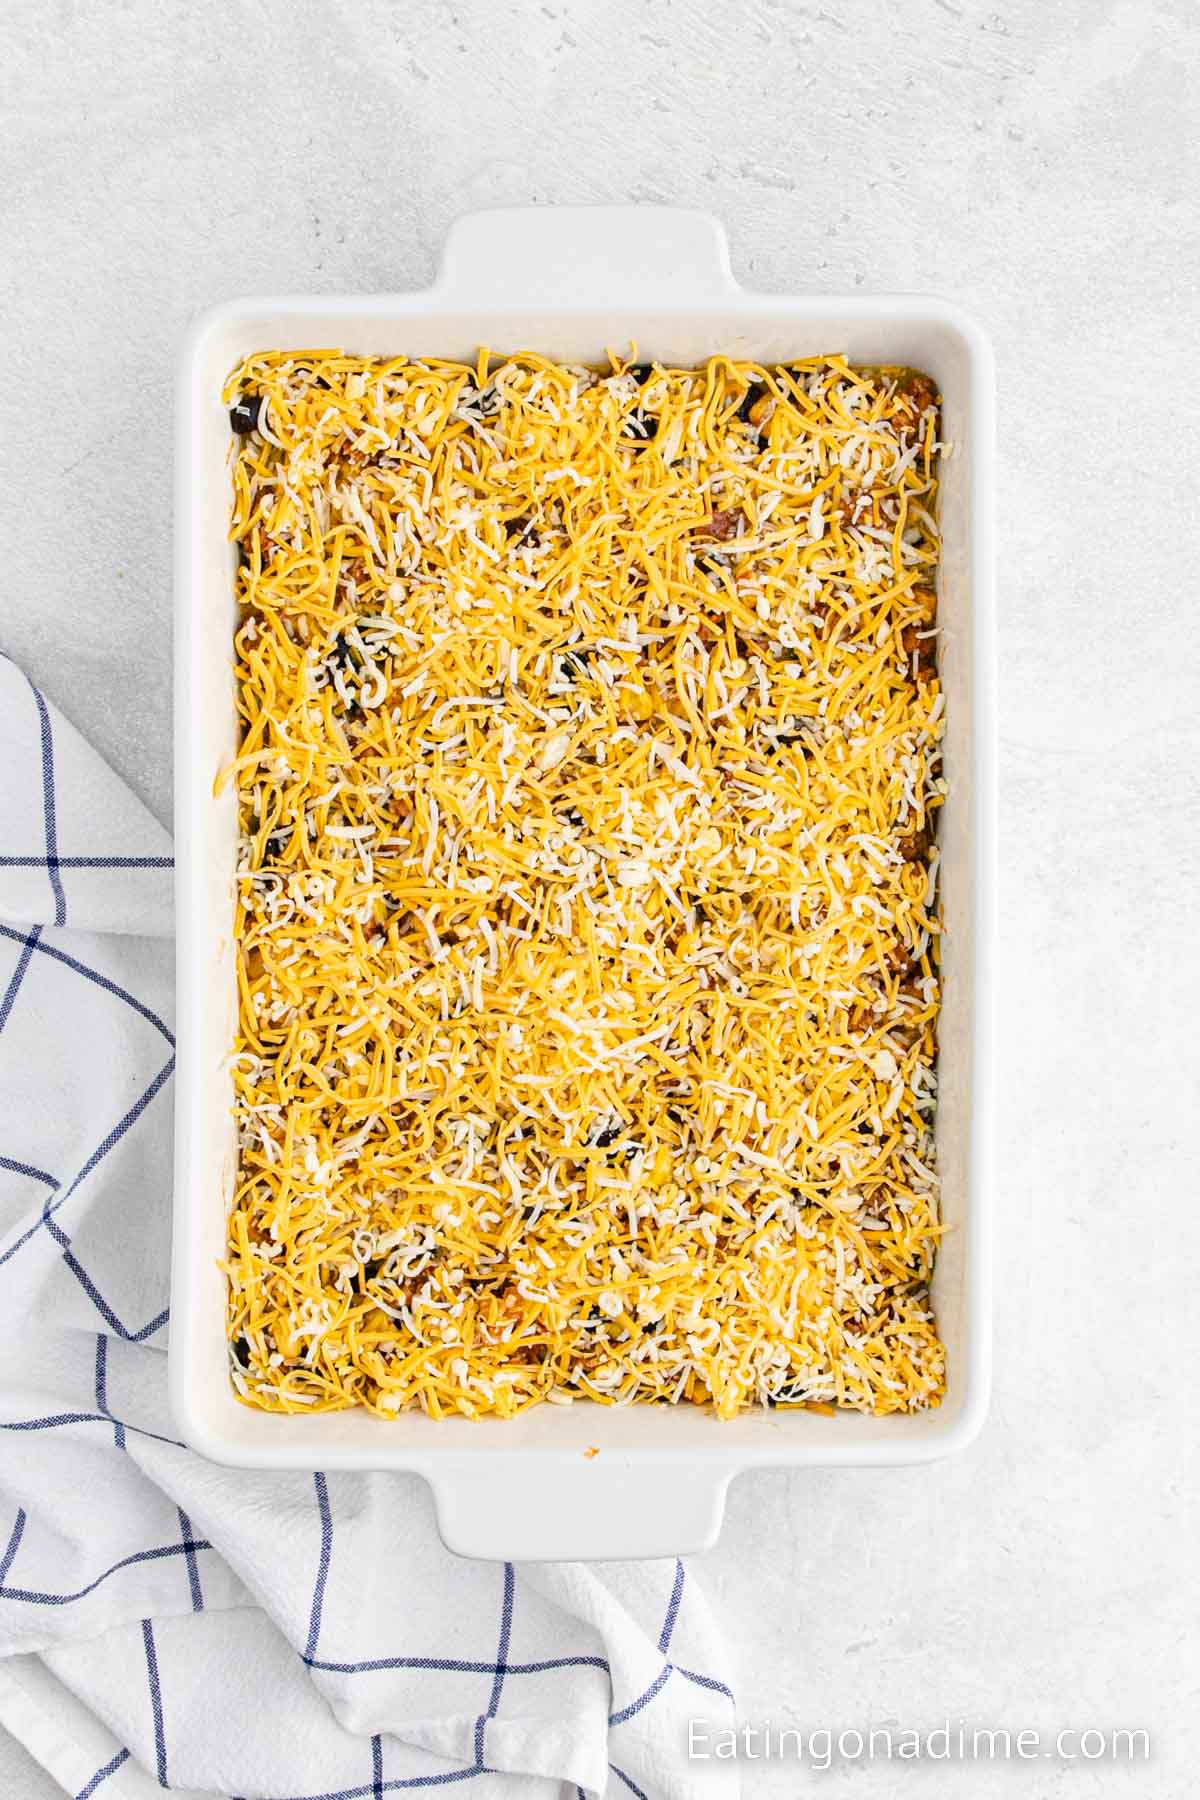 Breakfast casserole topped with shredded cheese